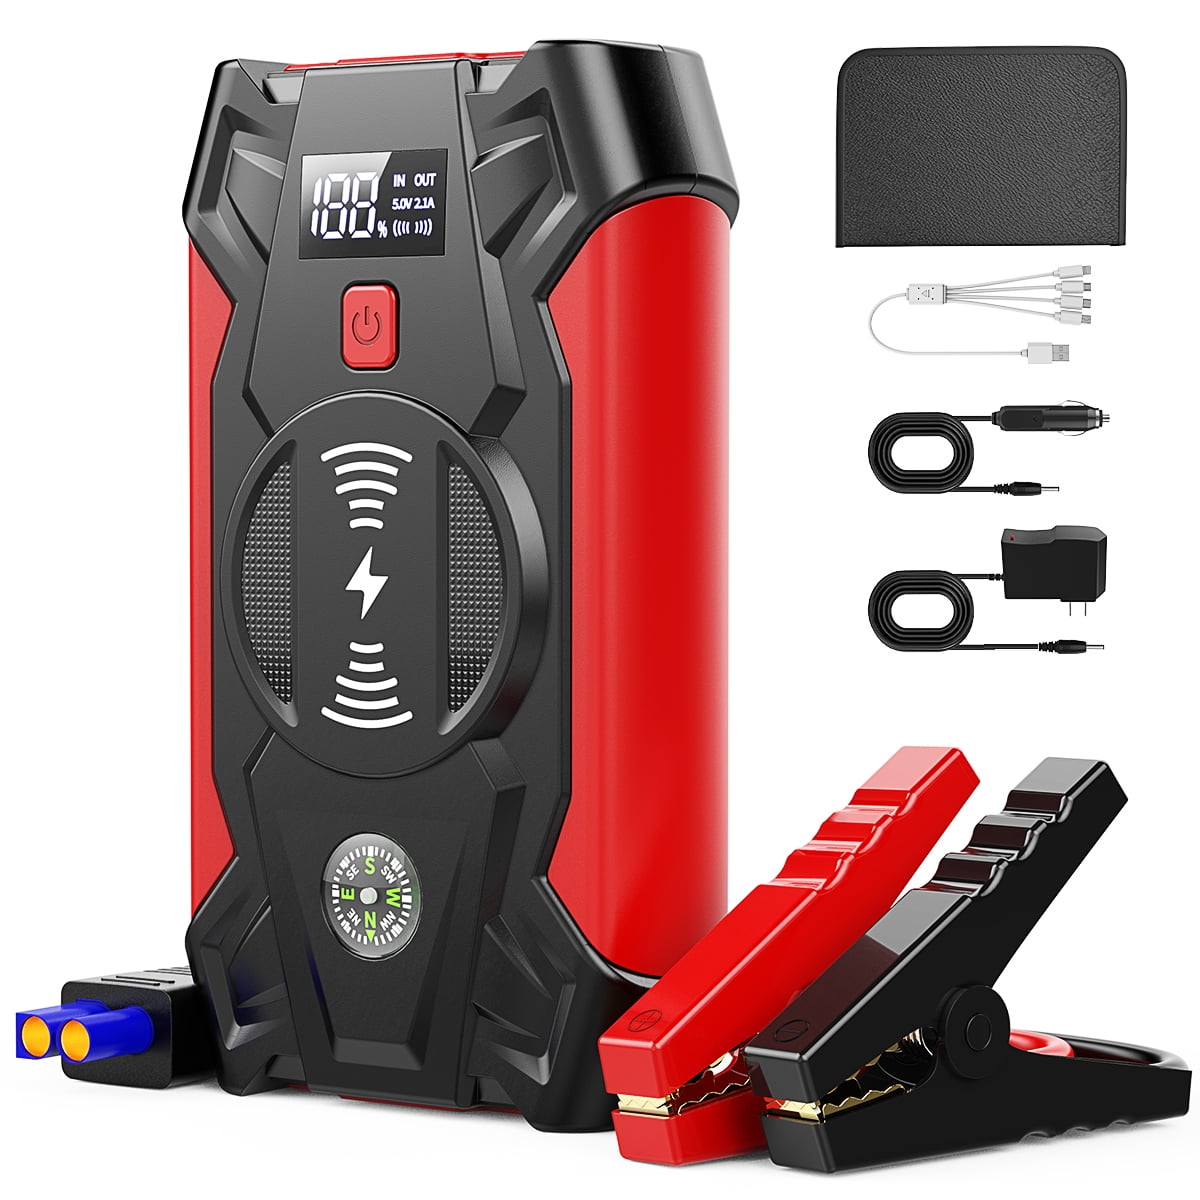 This popular car jump starter has an incredible 4.8-star rating on  -  Autoblog